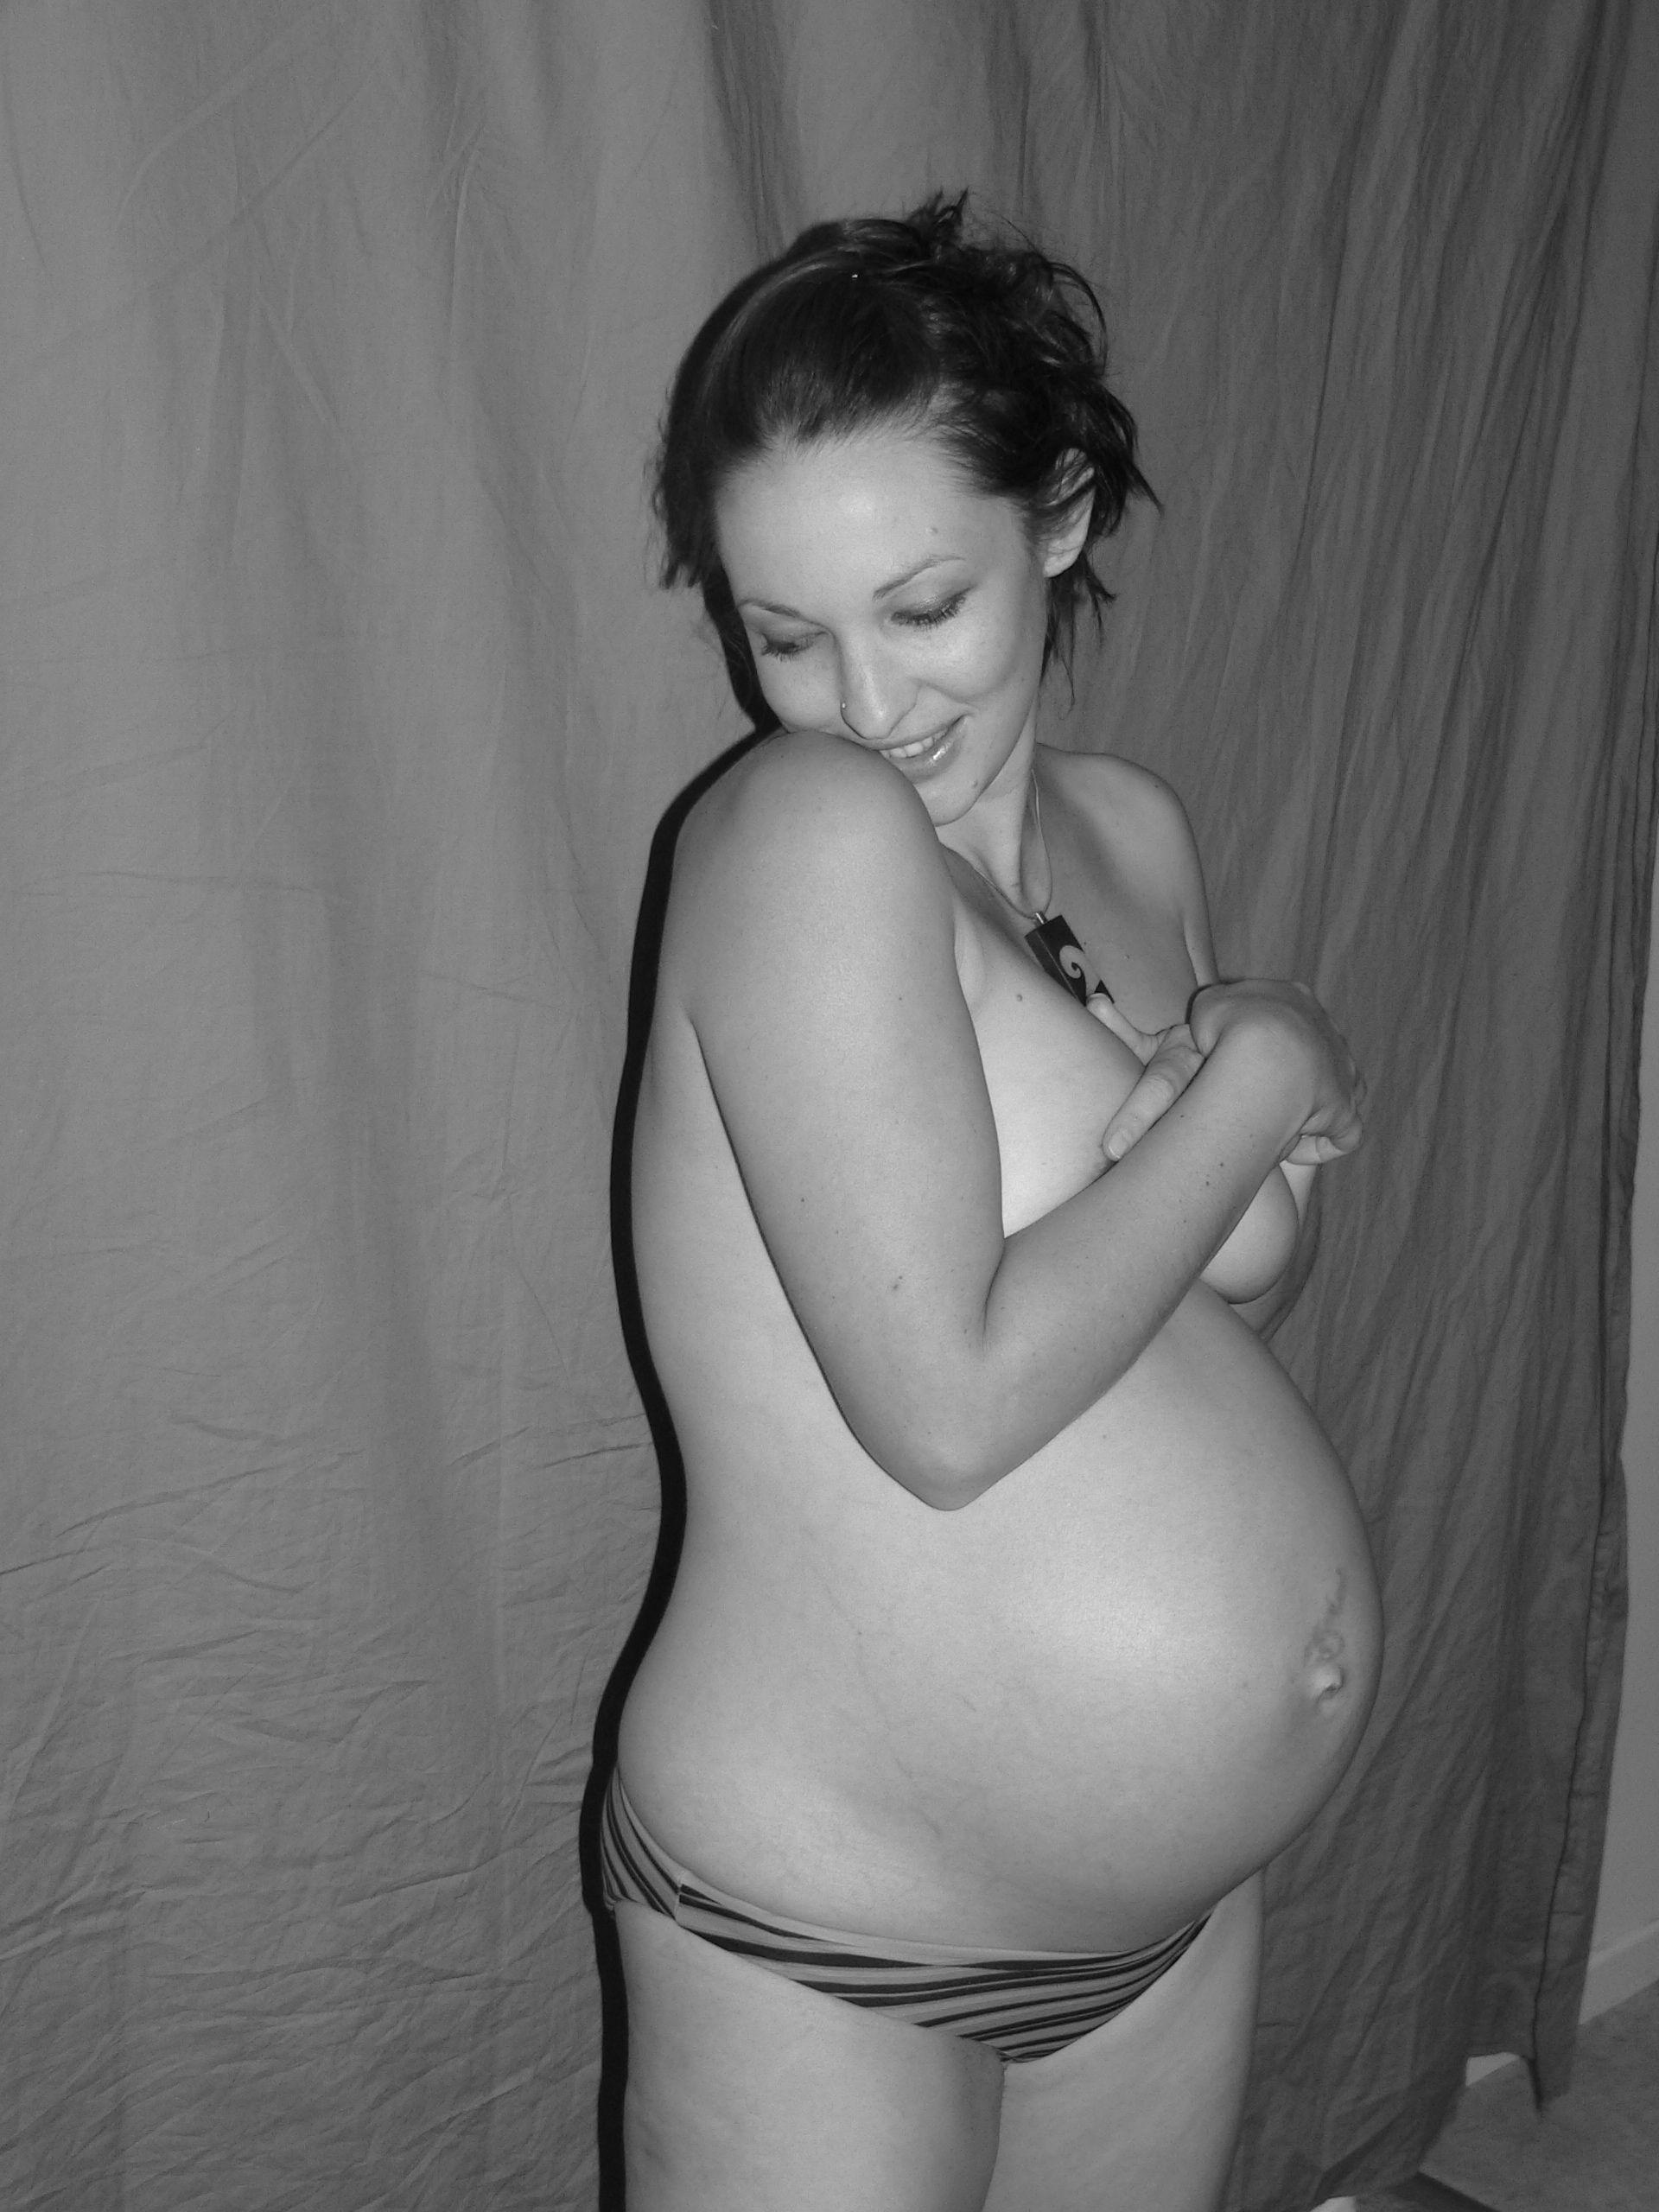 Black And White Nudes Pregnant - Vintage Nude Pregnant Pictures 4380 | Hot Sex Picture